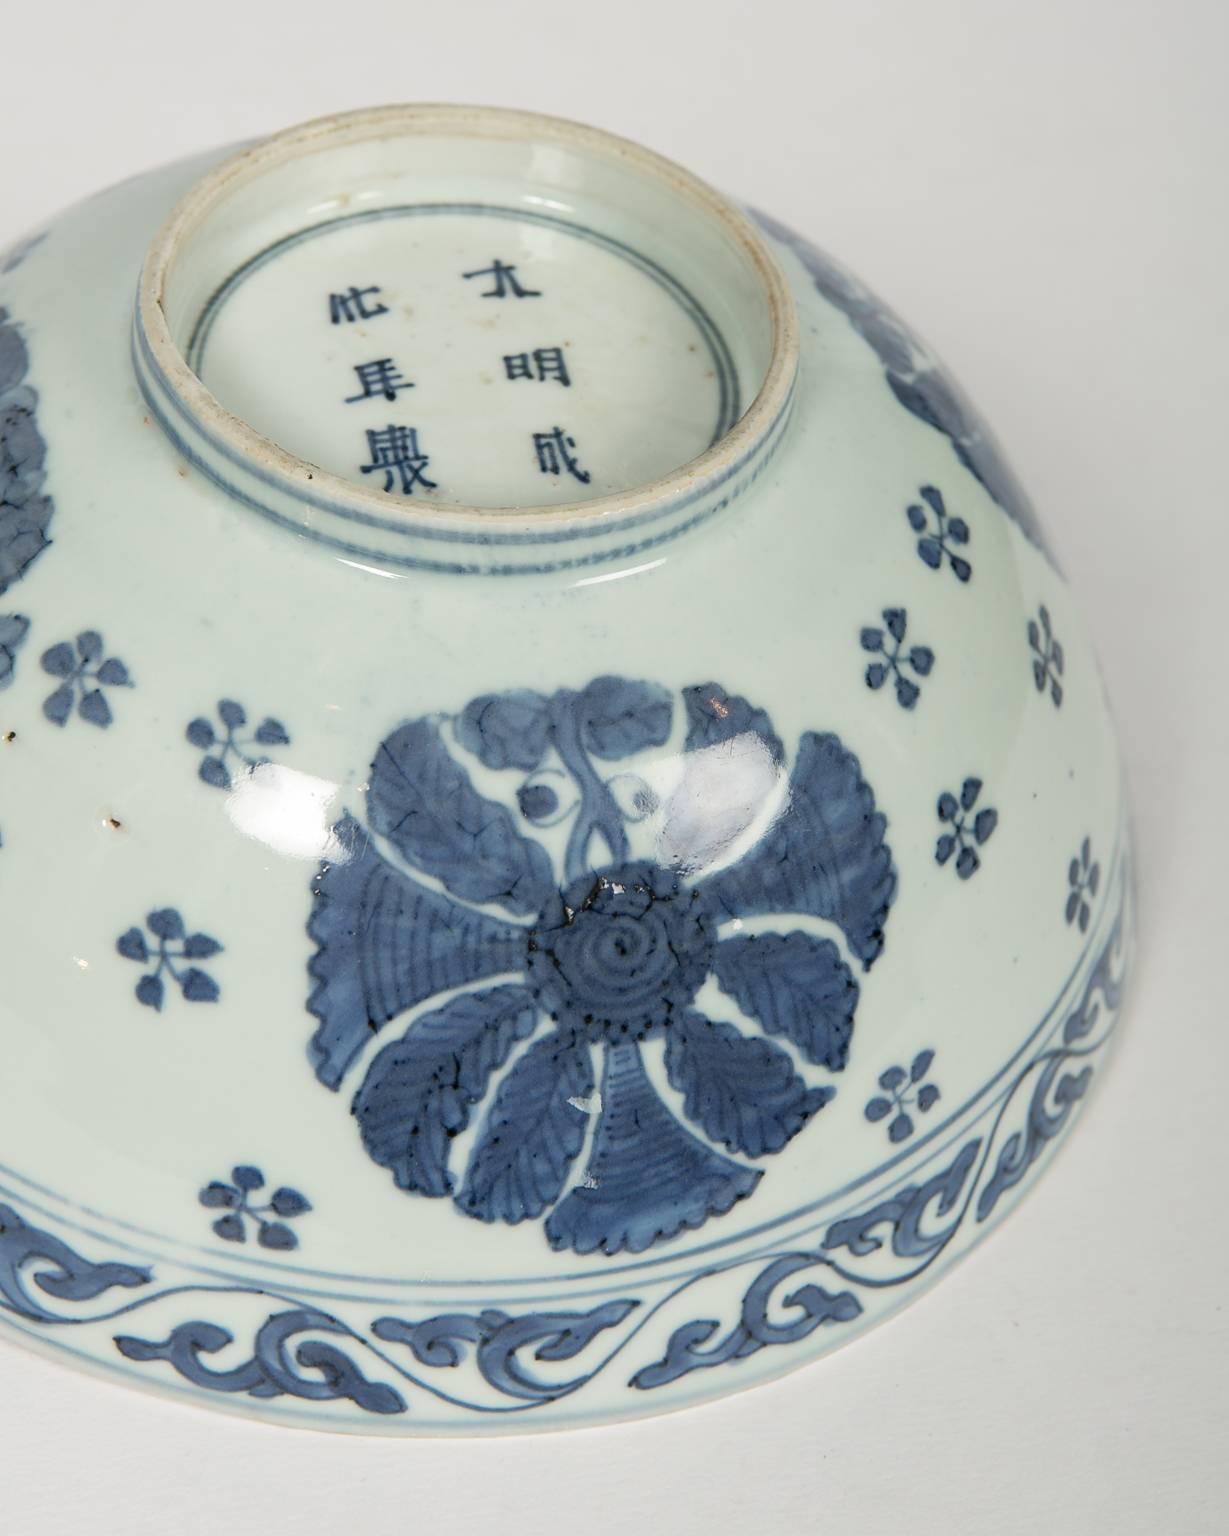 19th Century Antique Chinese Blue and White Porcelain Bowl Made in the Daoguong Reign 1820-50